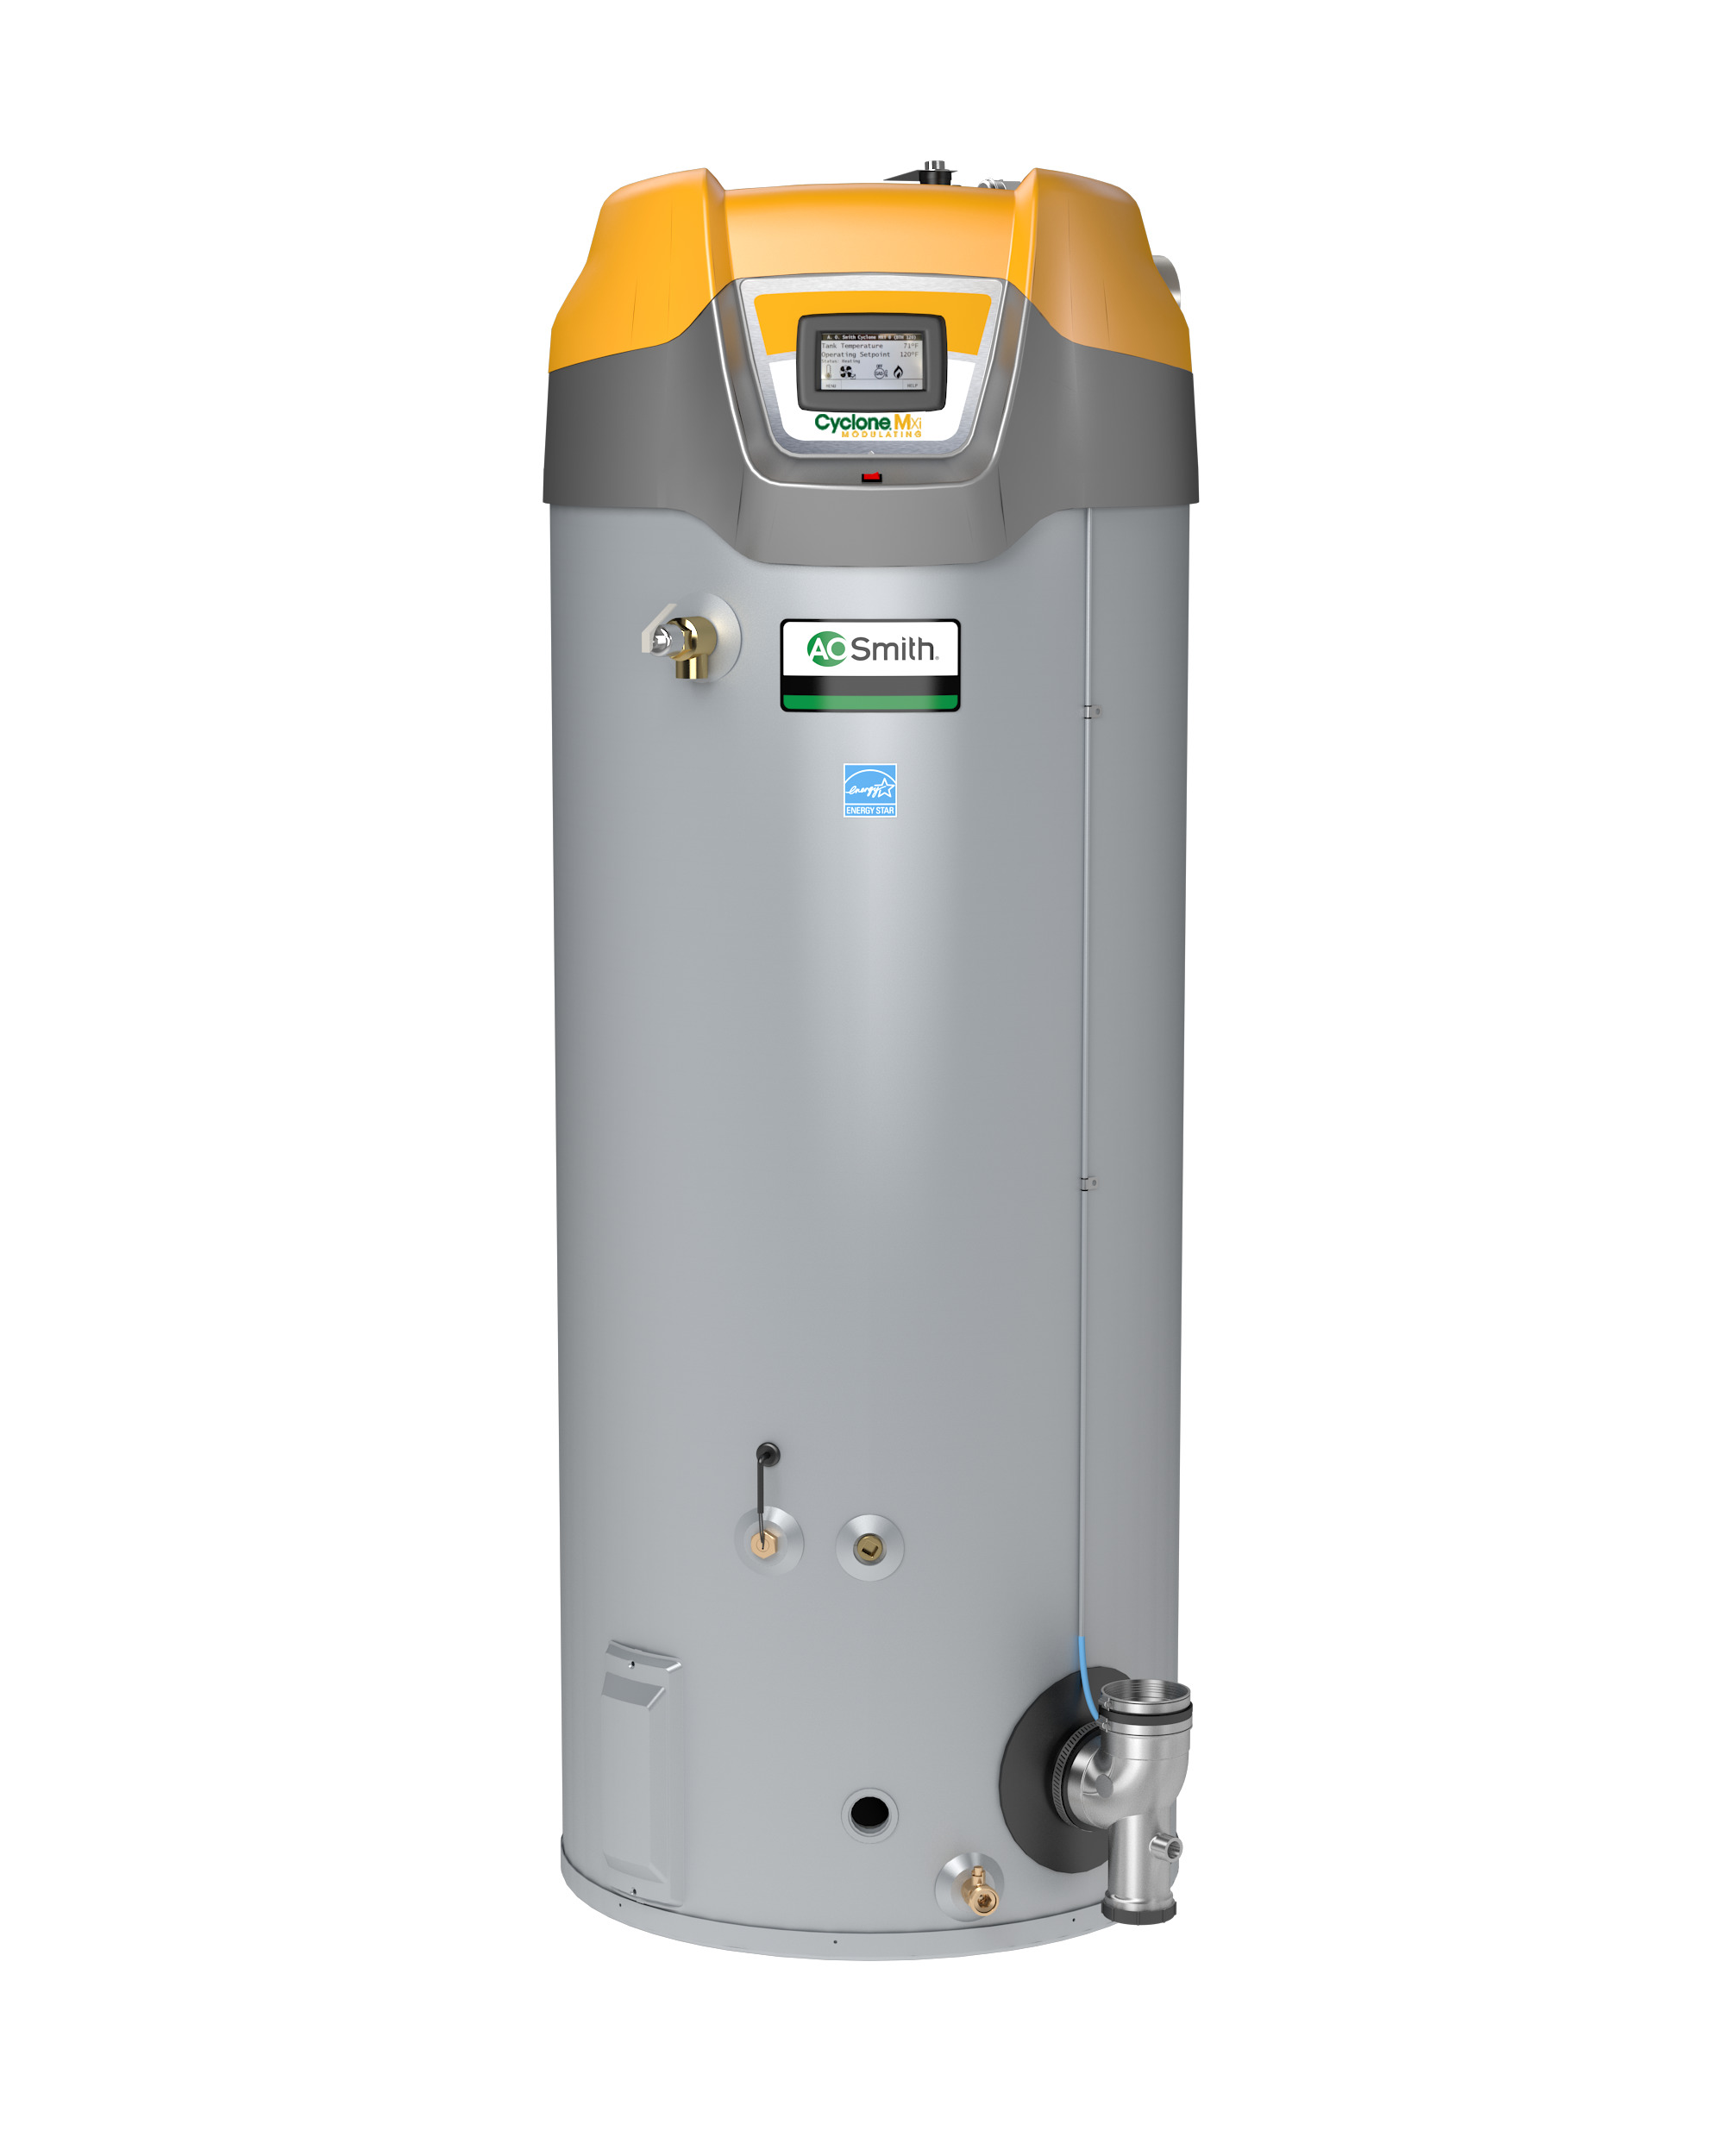 AO SMITH BTH-199: 100 GALLON, 199,000 BTU, 3" VENT, UP TO 97% THERMAL EFFICIENCY, NATURAL GAS, CYCLONE Mxi MODULATING COMMERCIAL GAS WATER HEATER